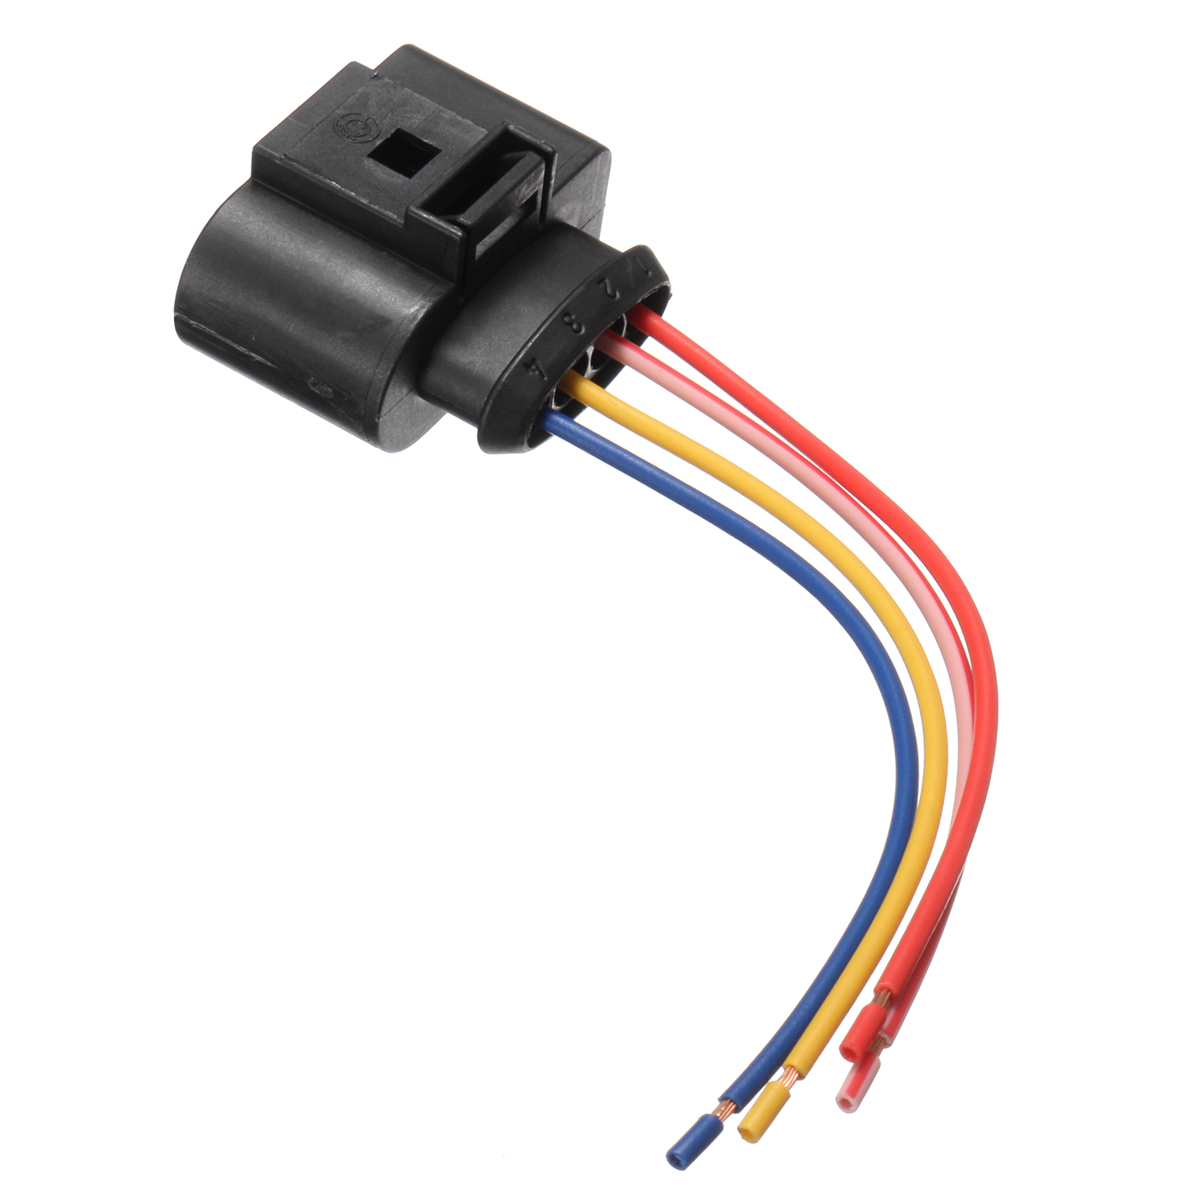 Oem Ignition Coil Connector Plug Pack